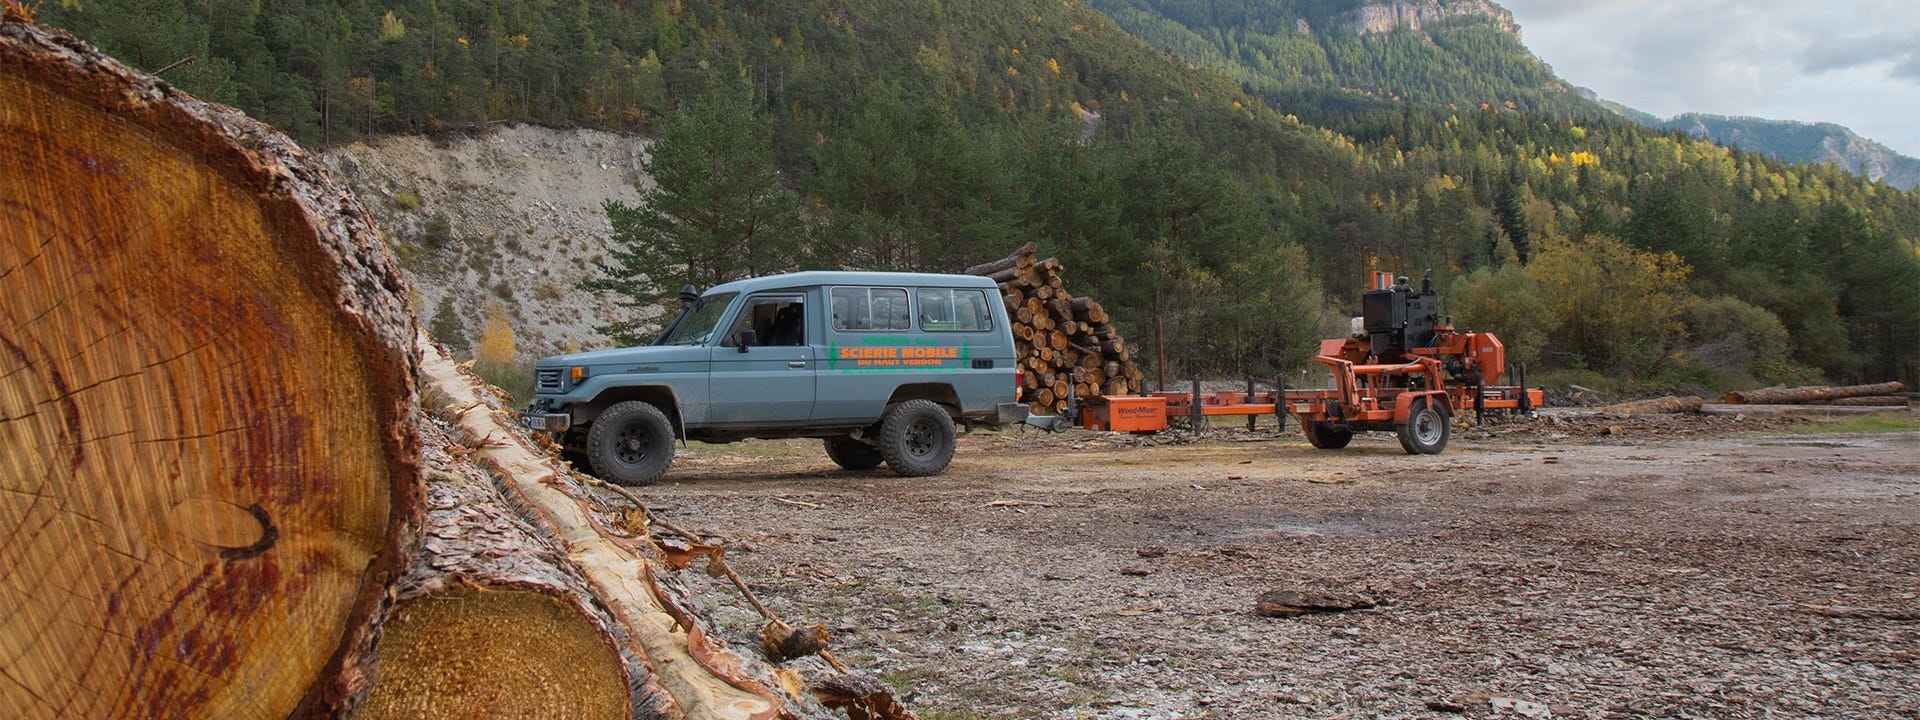 Year-round sawmilling in Haut-Verdon valley with the Wood-Mizer LT70 portable sawmill